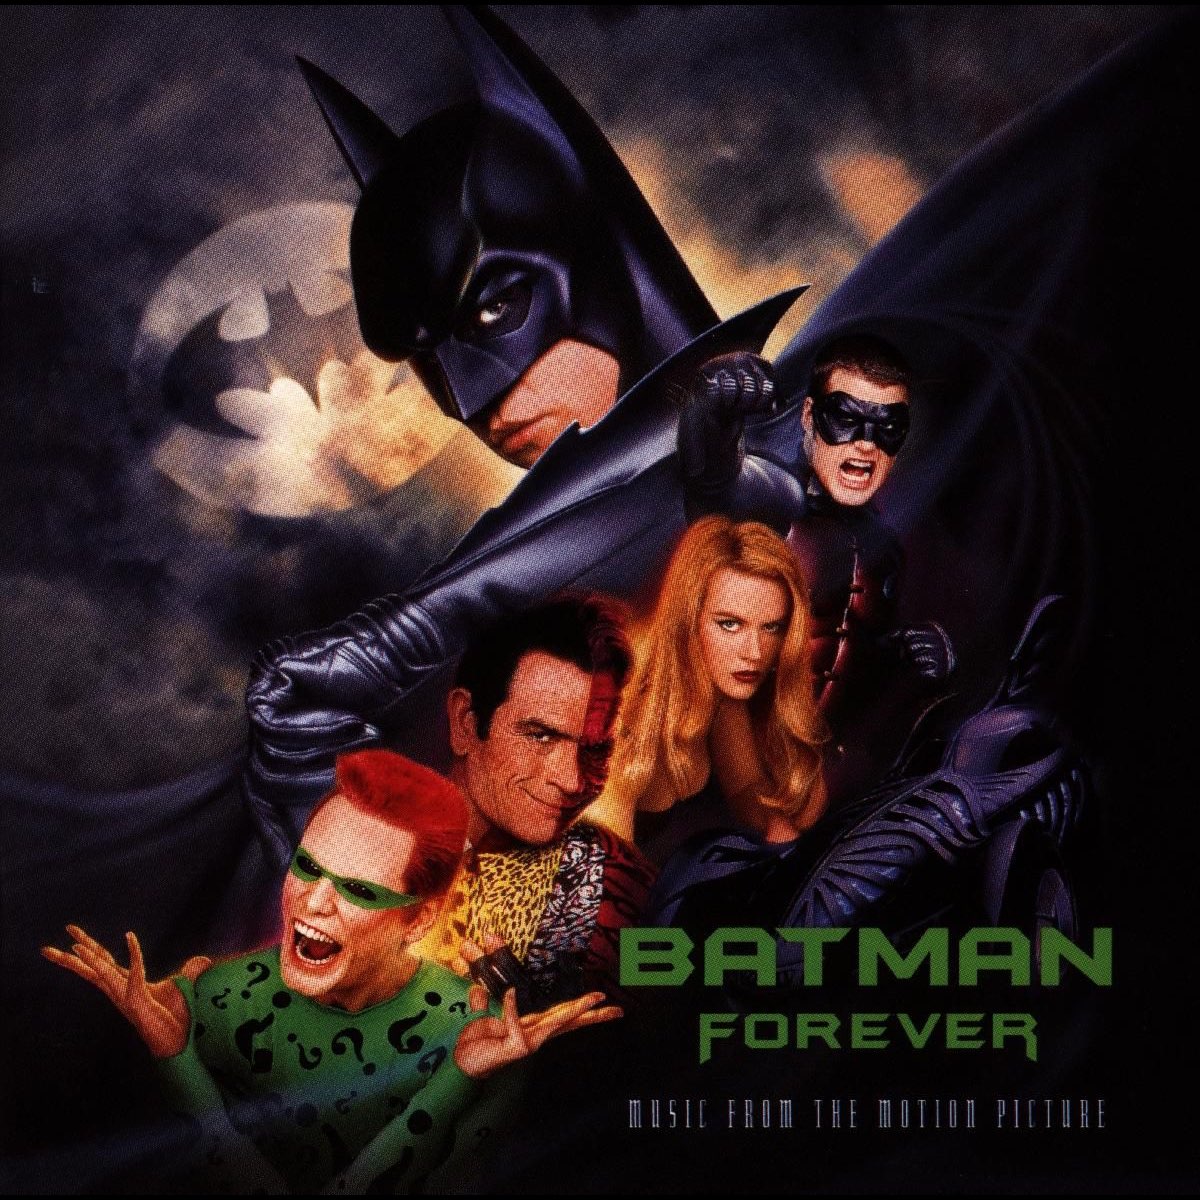 Batman Forever (Music from the Motion Picture) by Various Artists on iTunes